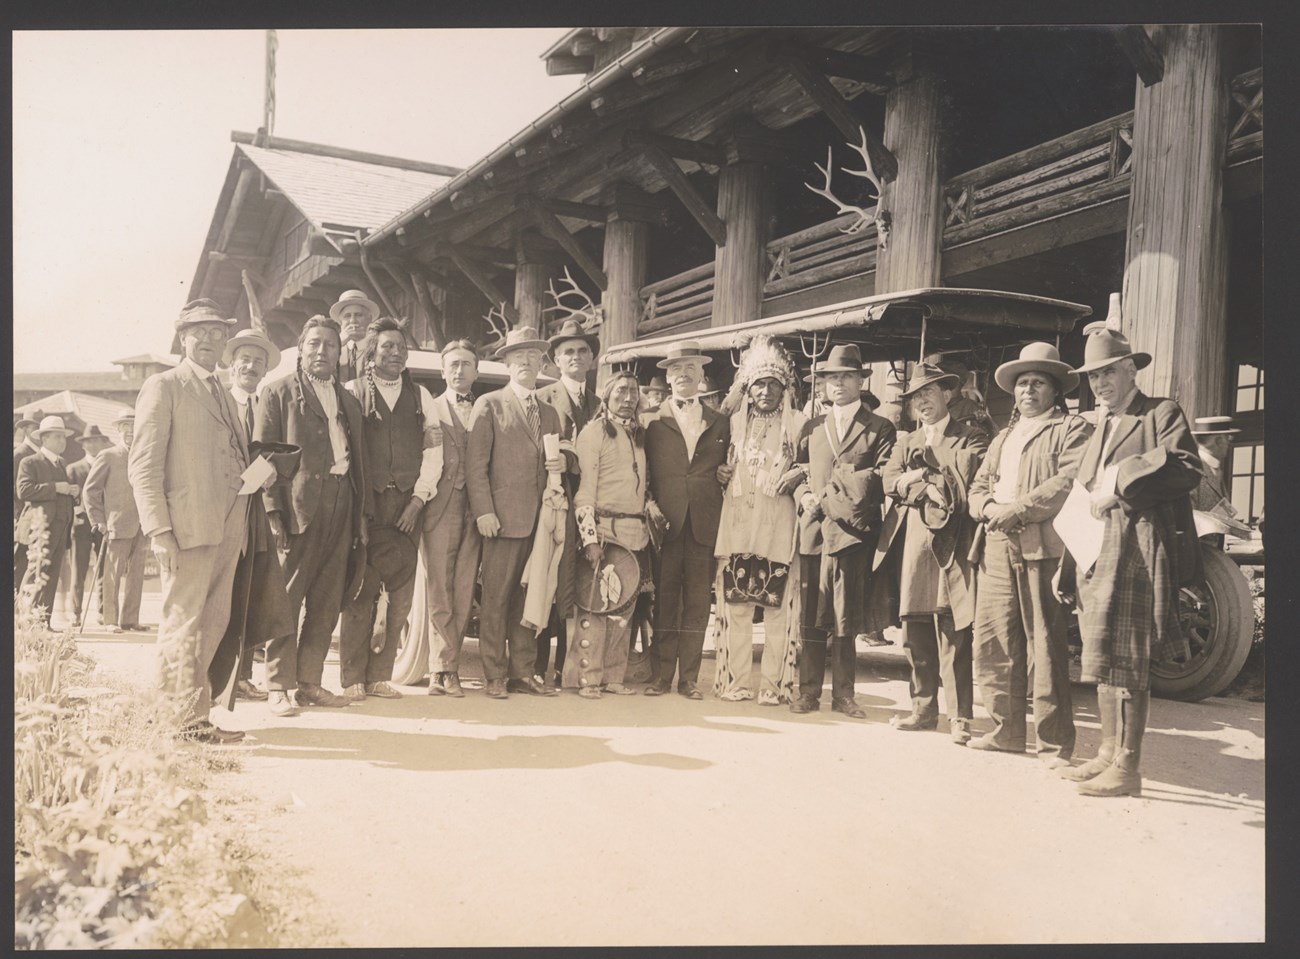 Men and suits and Native Americans pose for a photo in front of a large log building